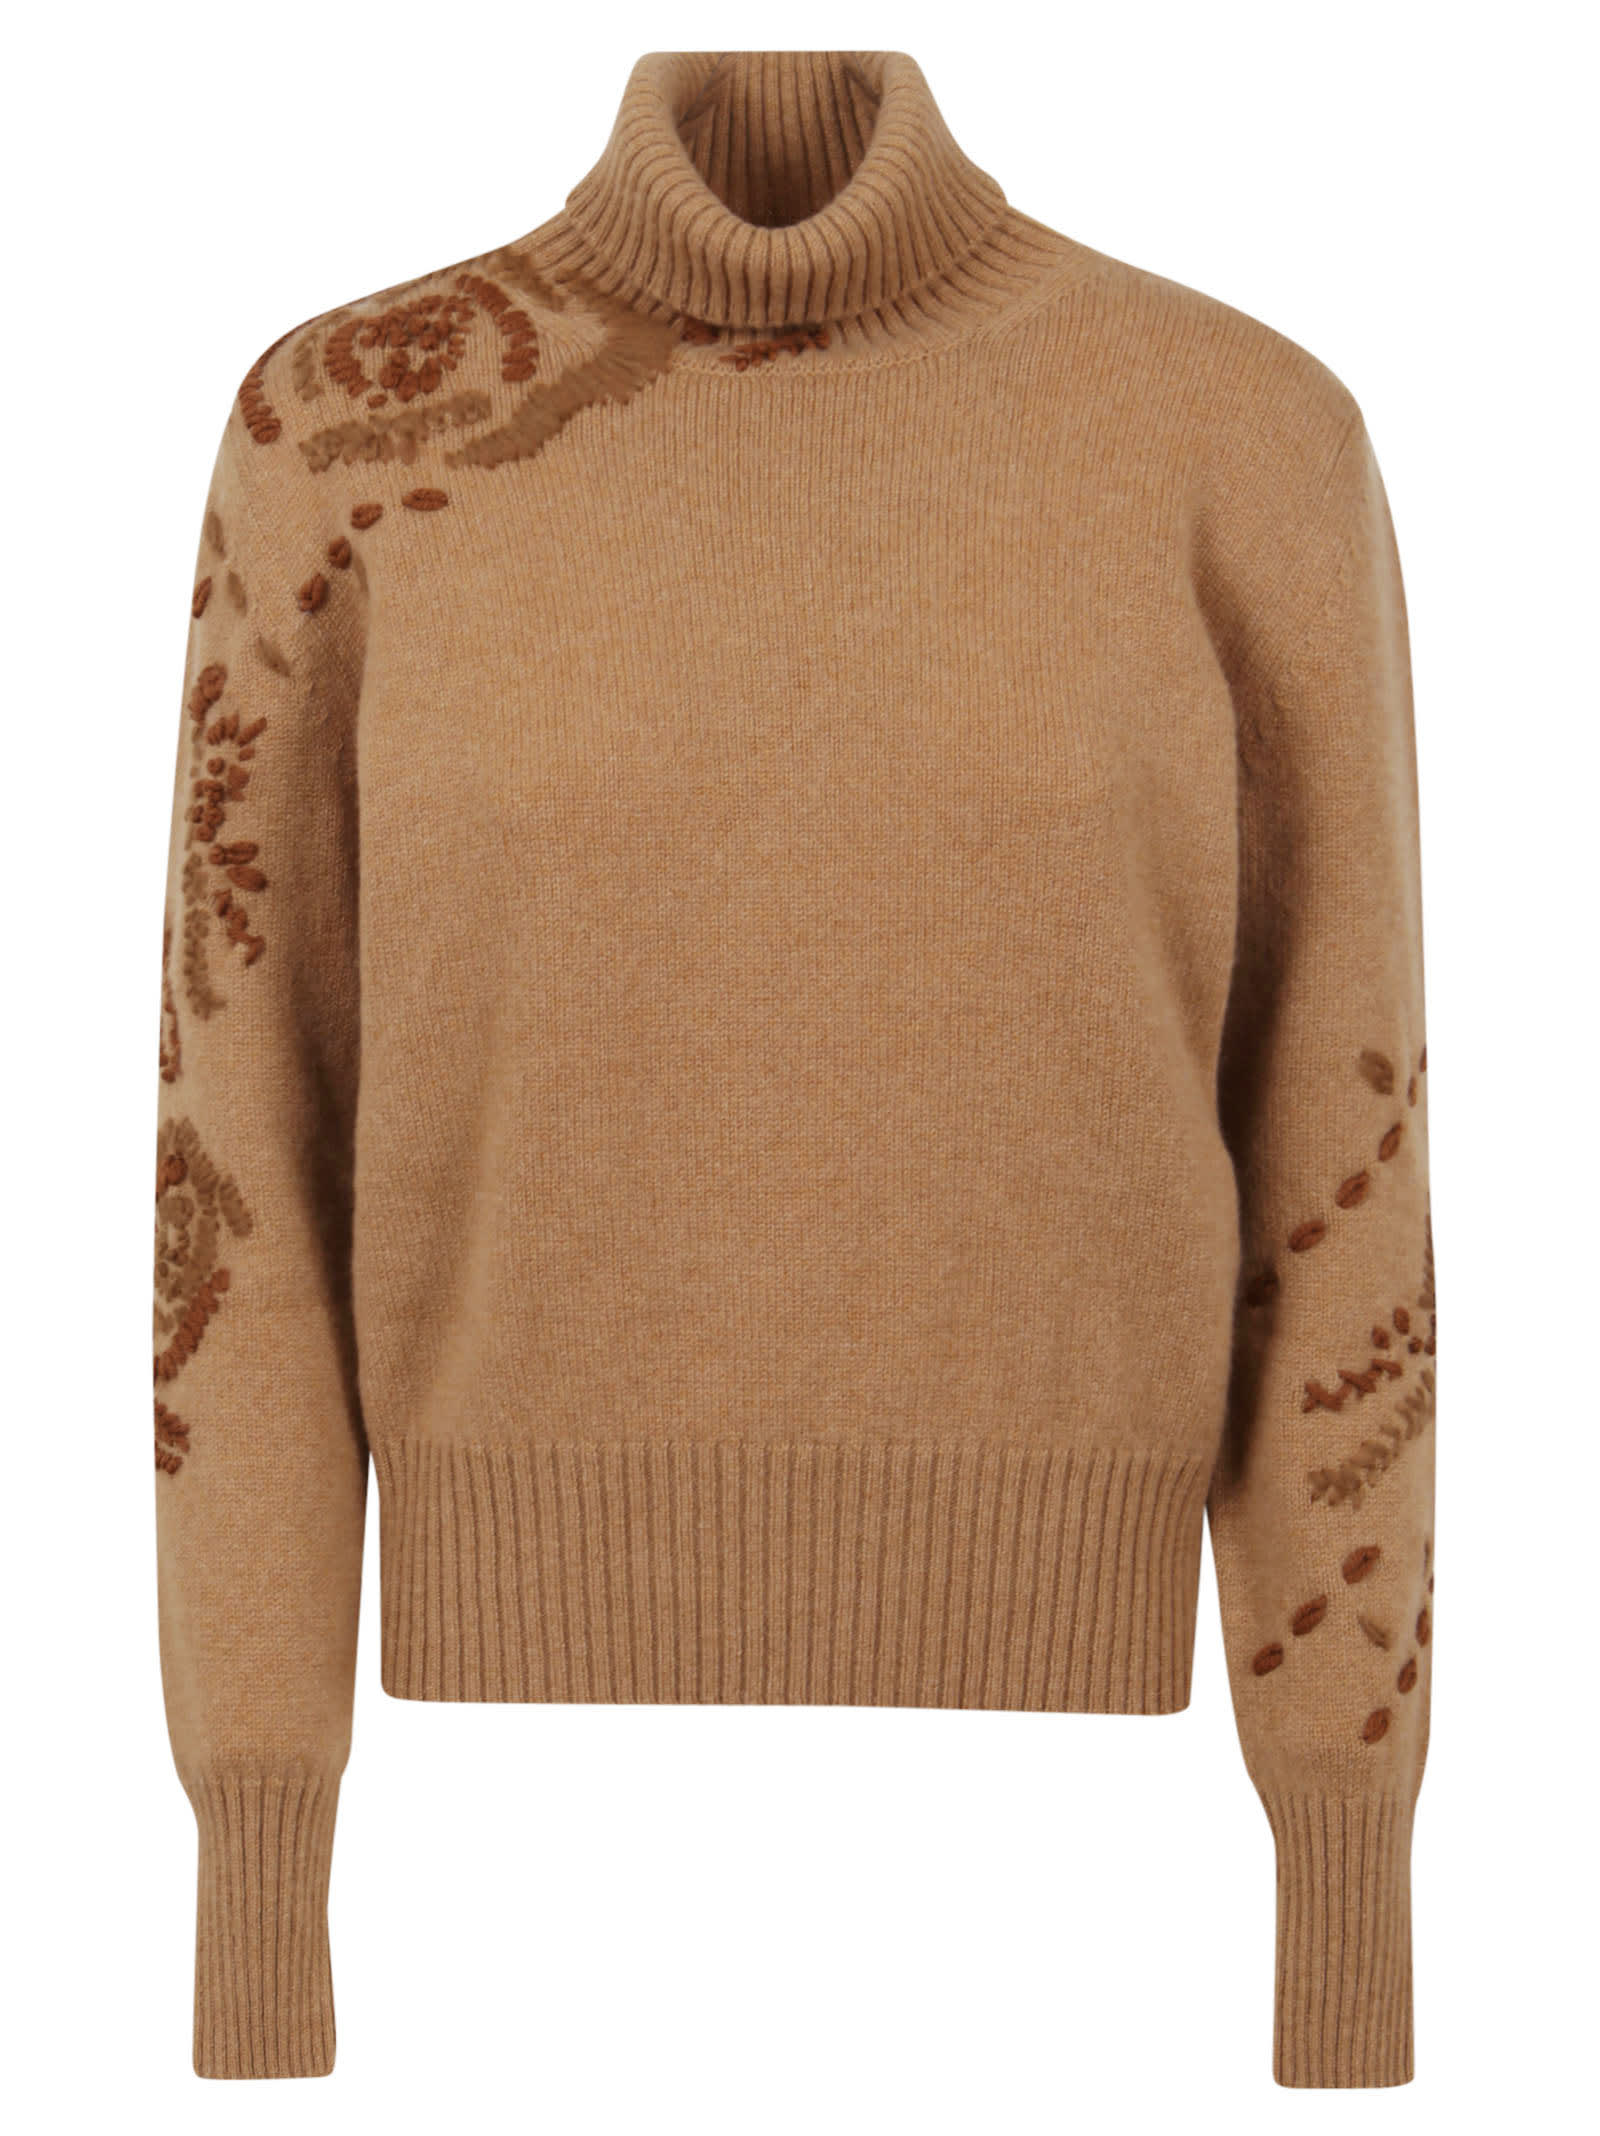 Ermanno Scervino Long Sleeve High Neck Sweater